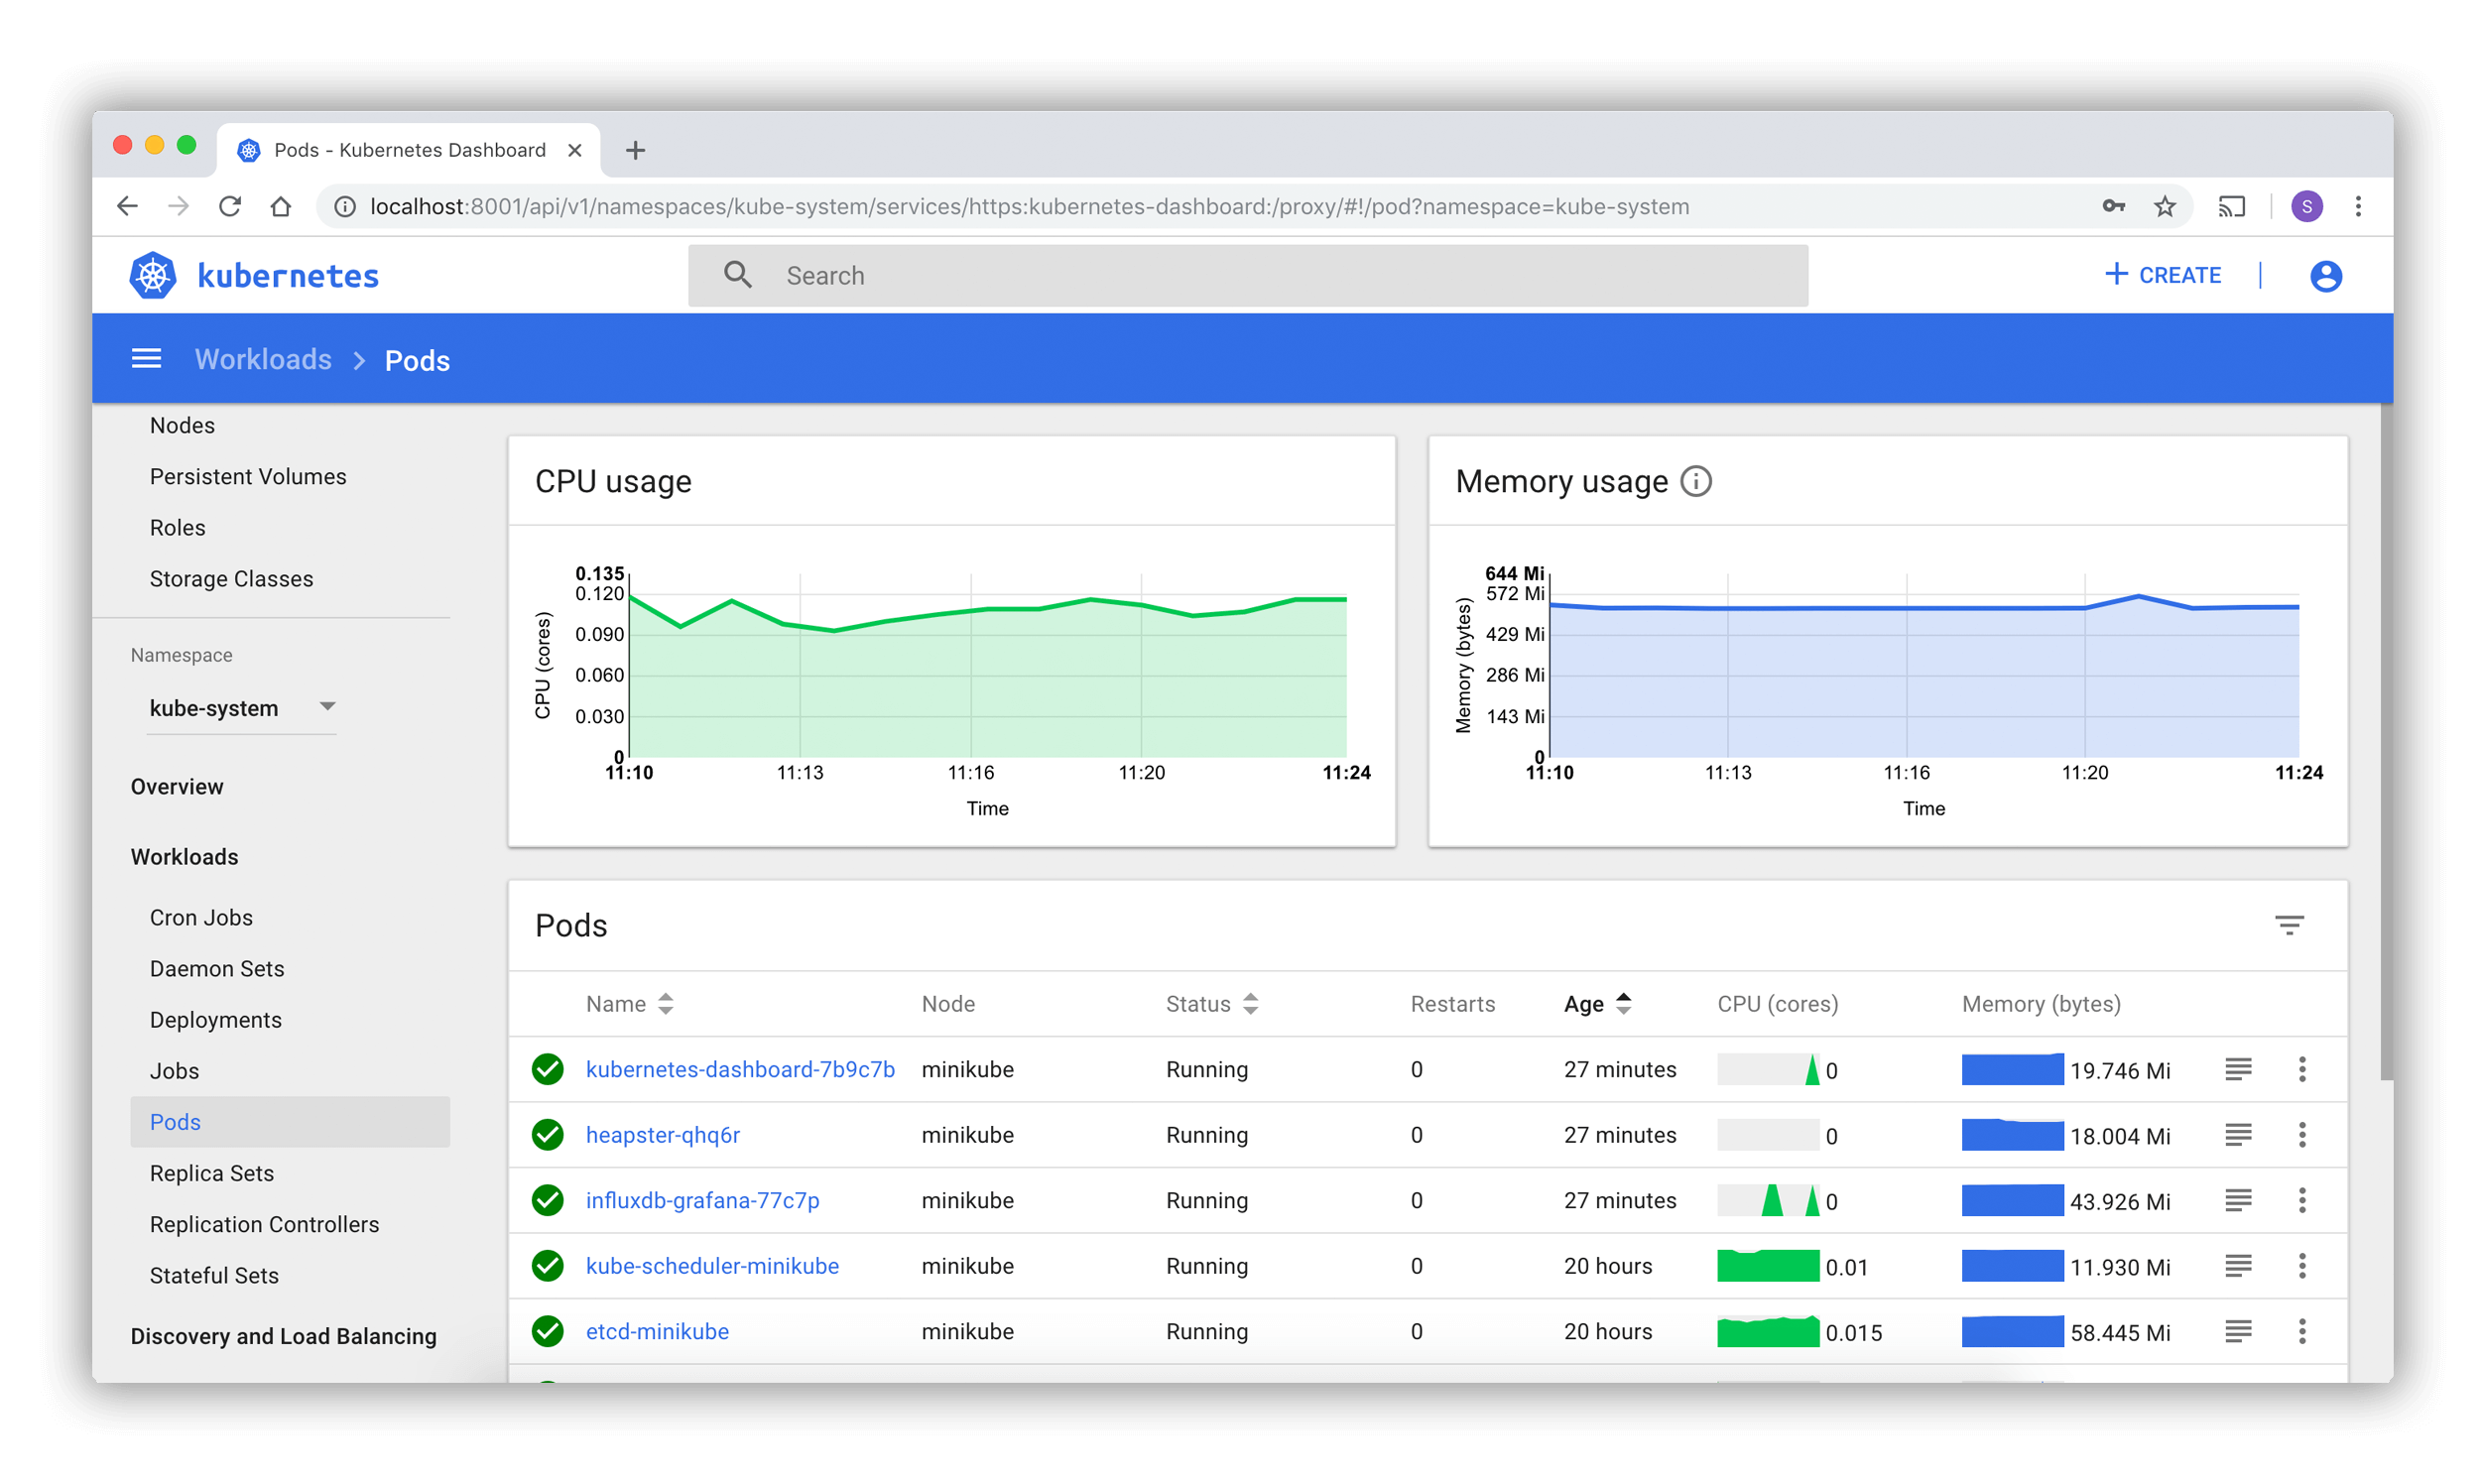 Screenshot from the Kubernetes dashboard application